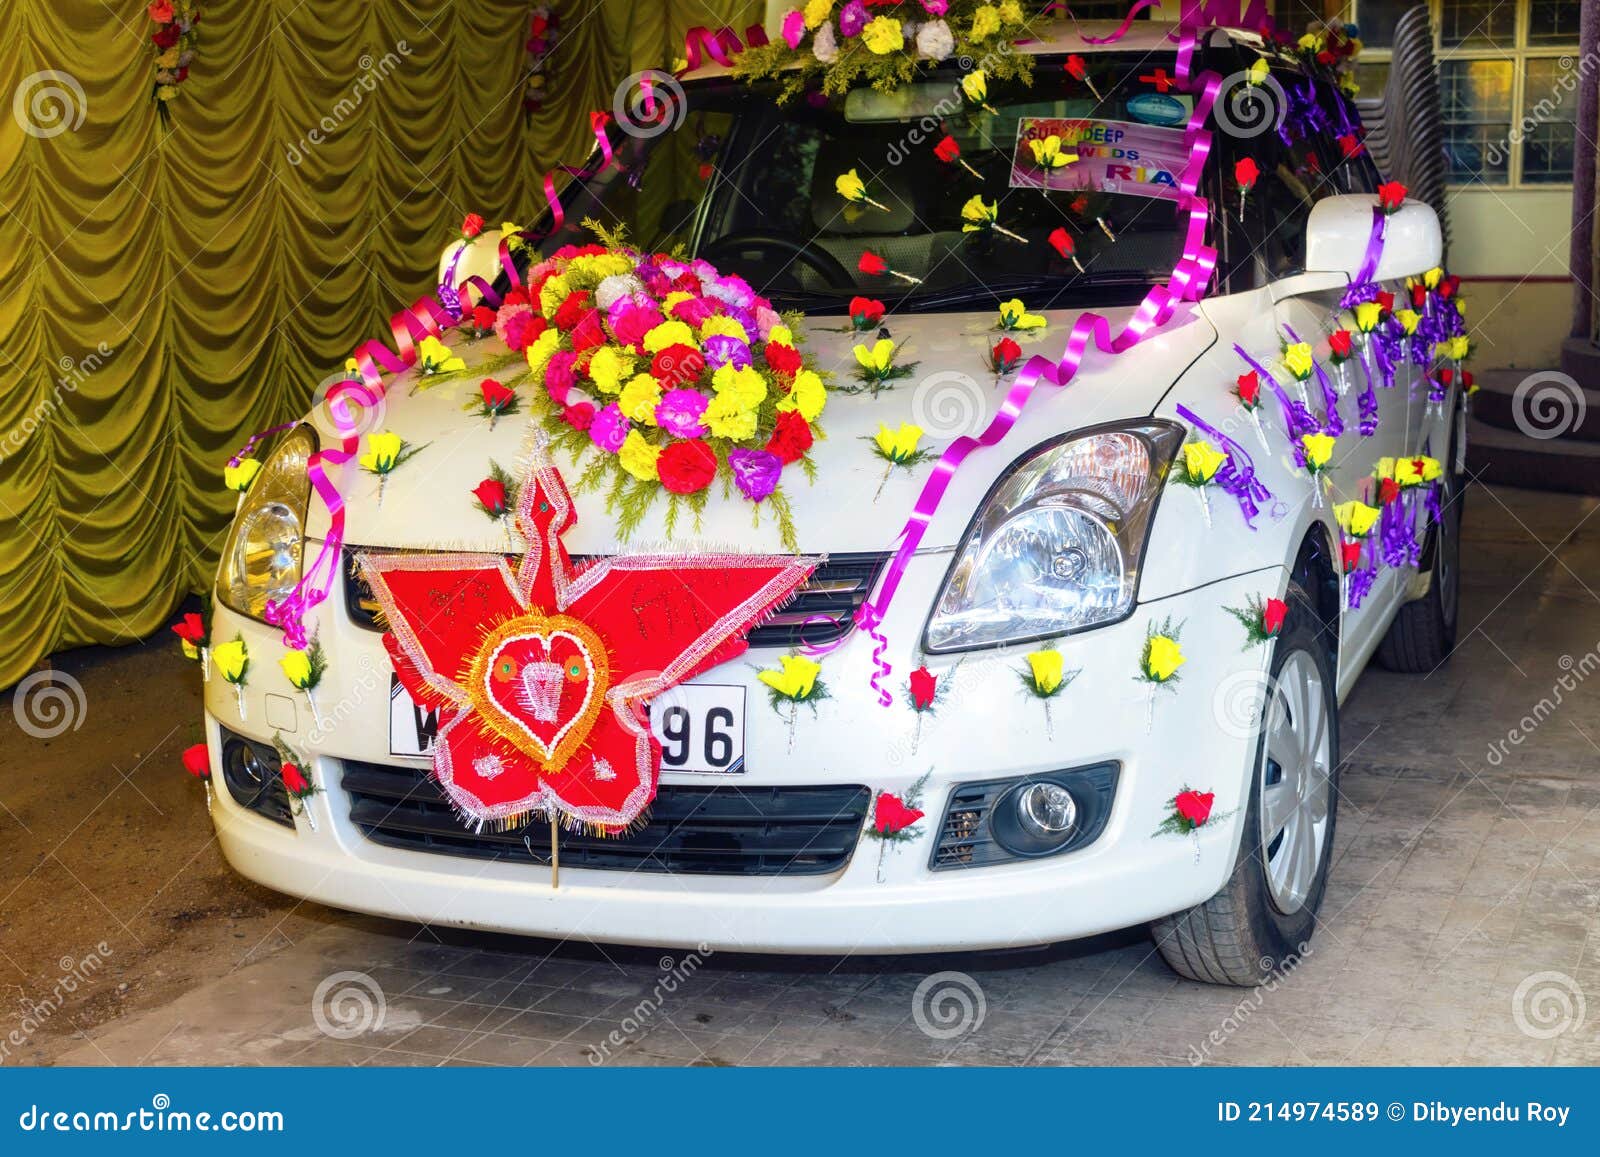 India s No.1 Decoration and Party Planning Company, | birthdayorganizer.in